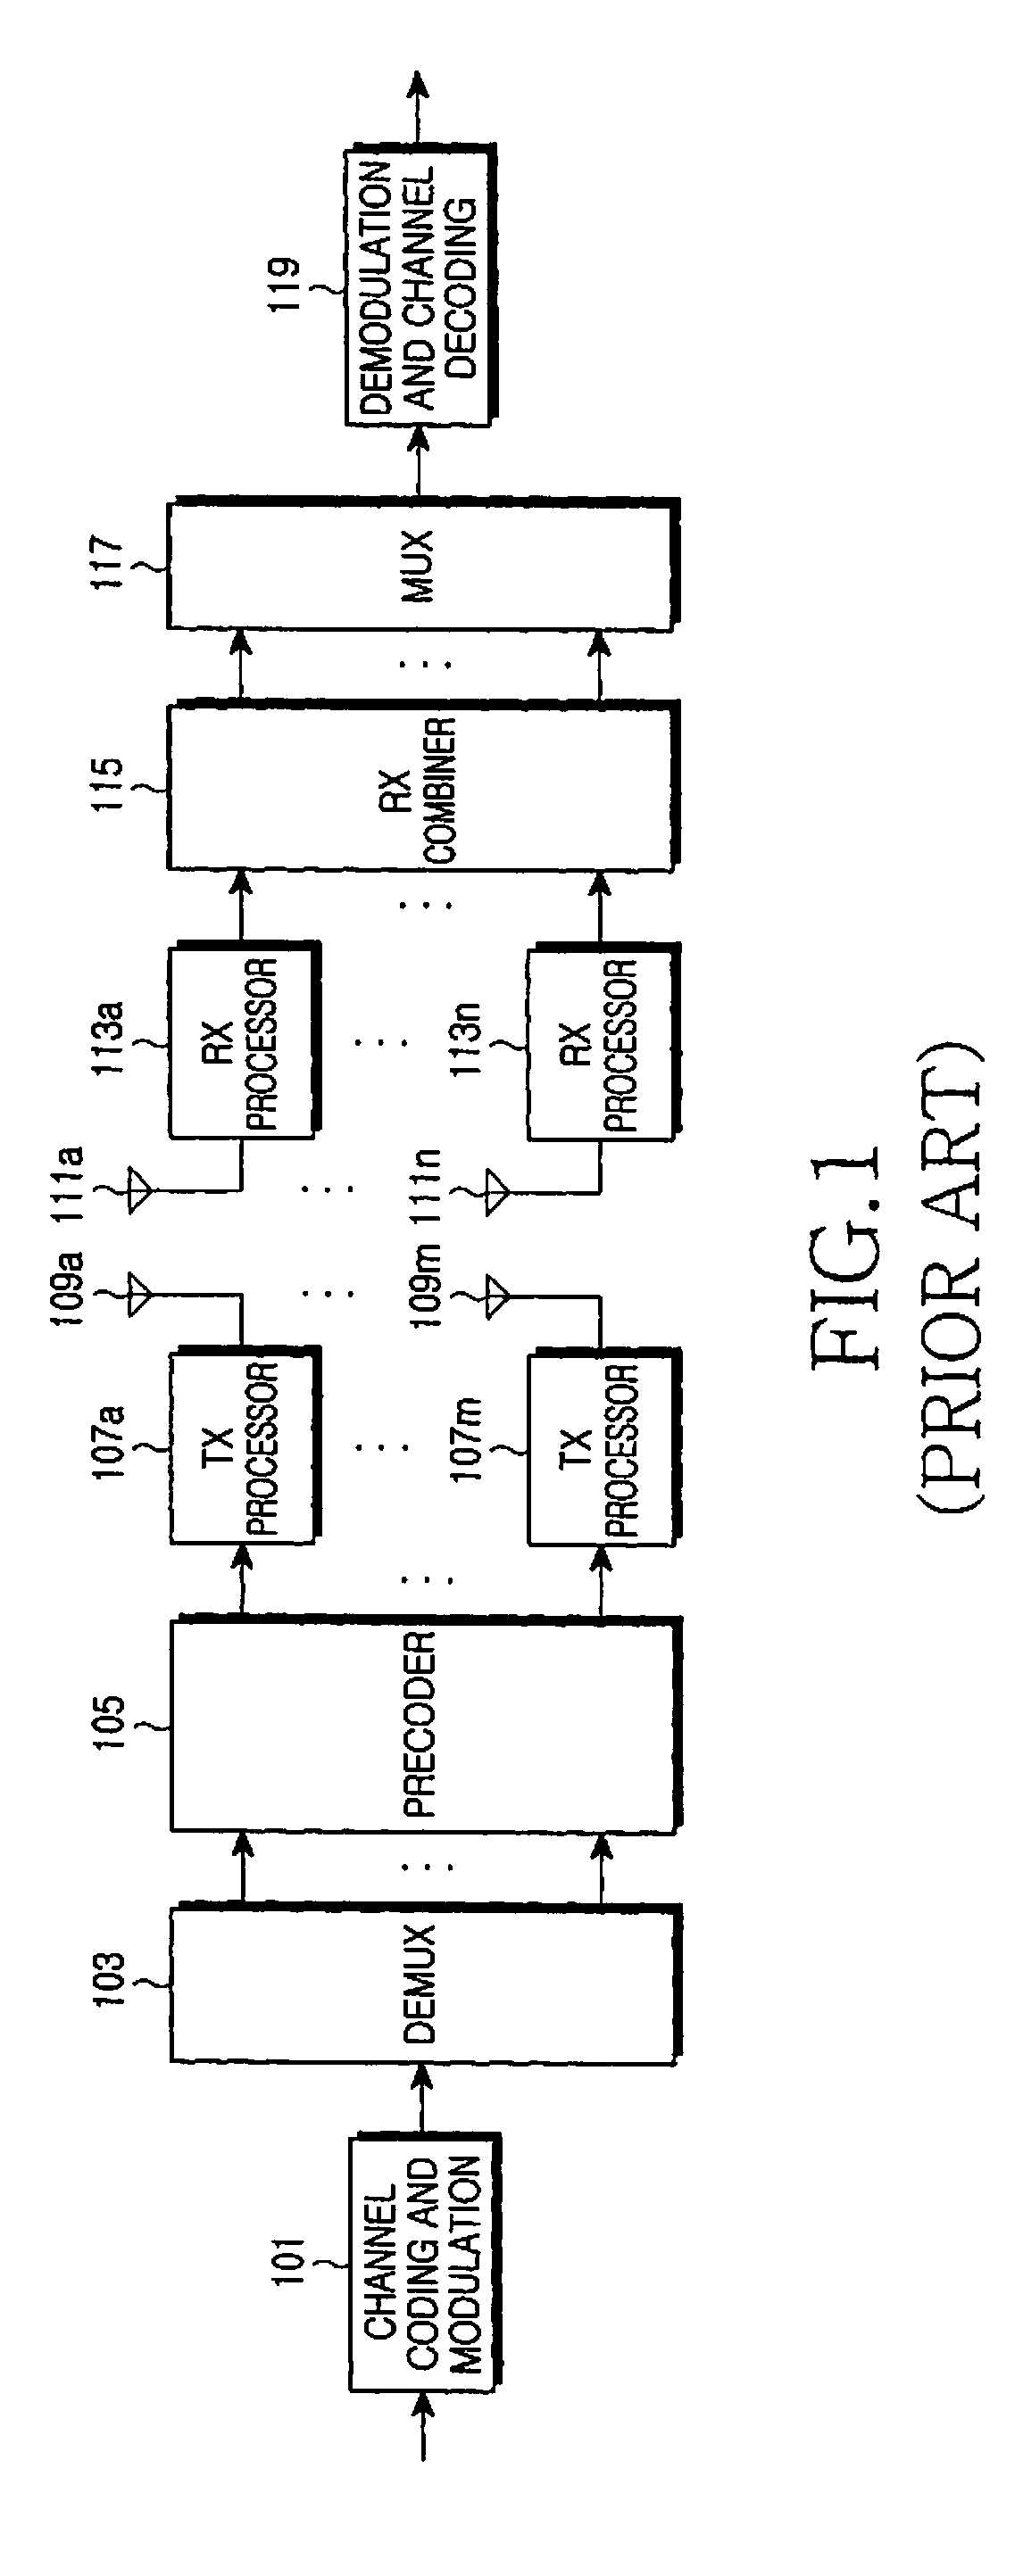 Method and apparatus for transmitting and receiving shared control channel message in a wireless communication system using orthogonal frequency division multiple access